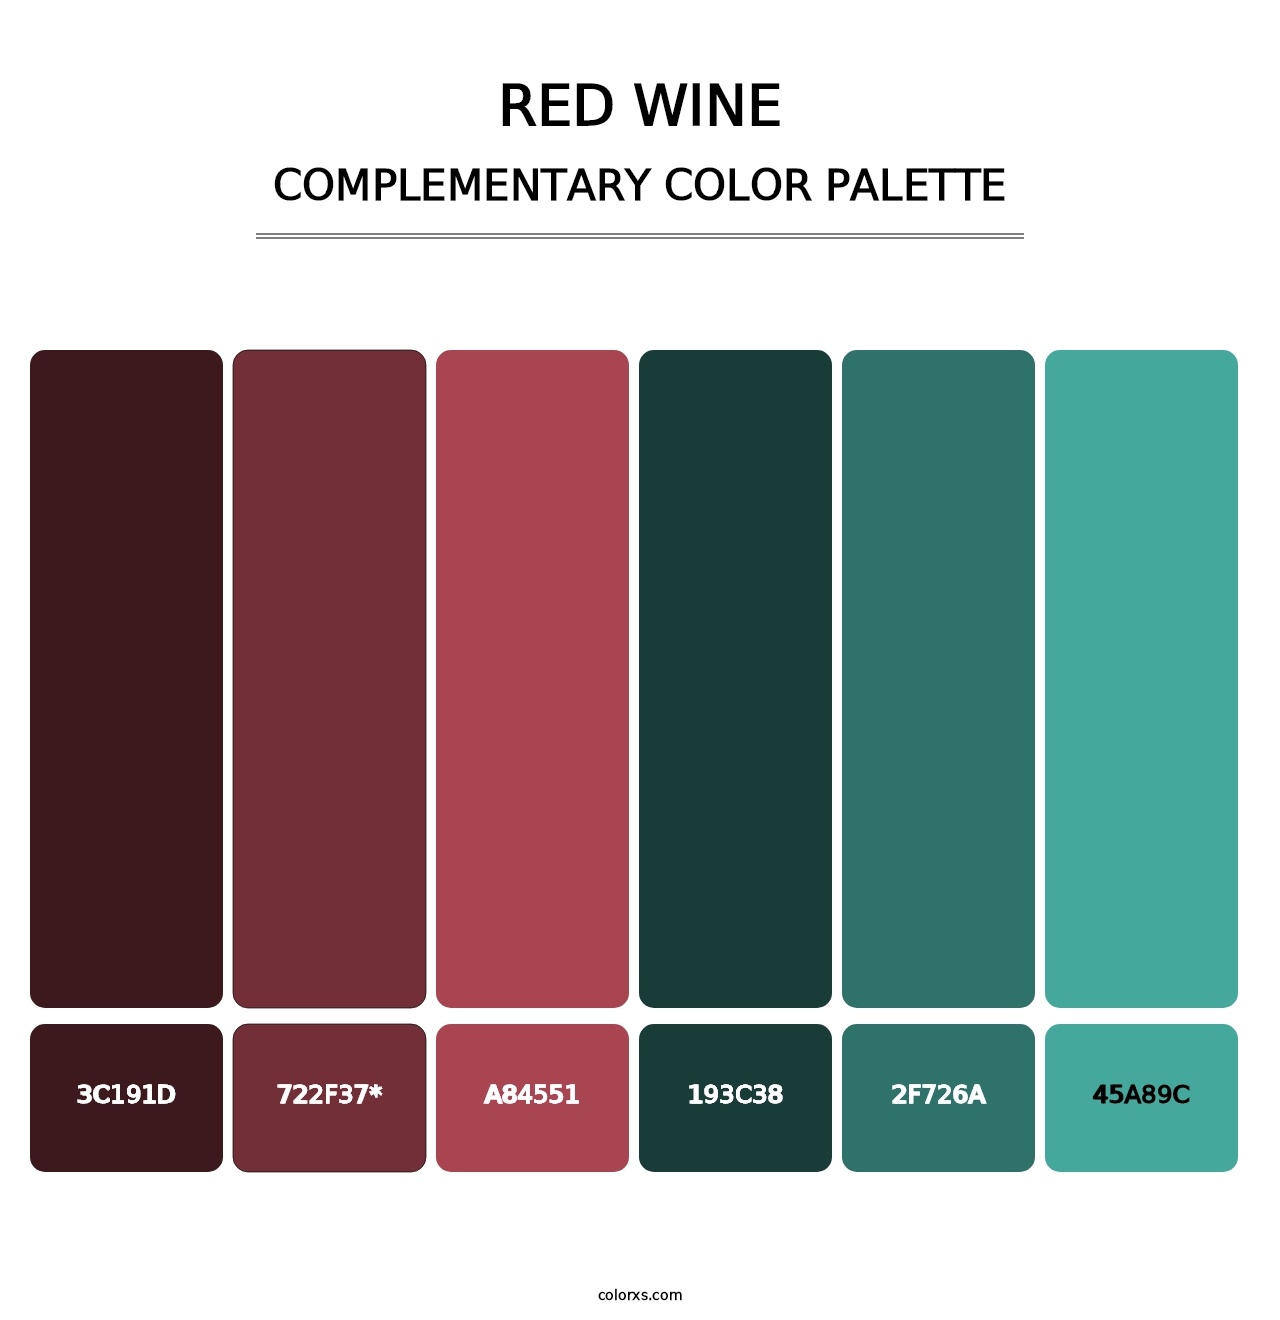 Red Wine - Complementary Color Palette